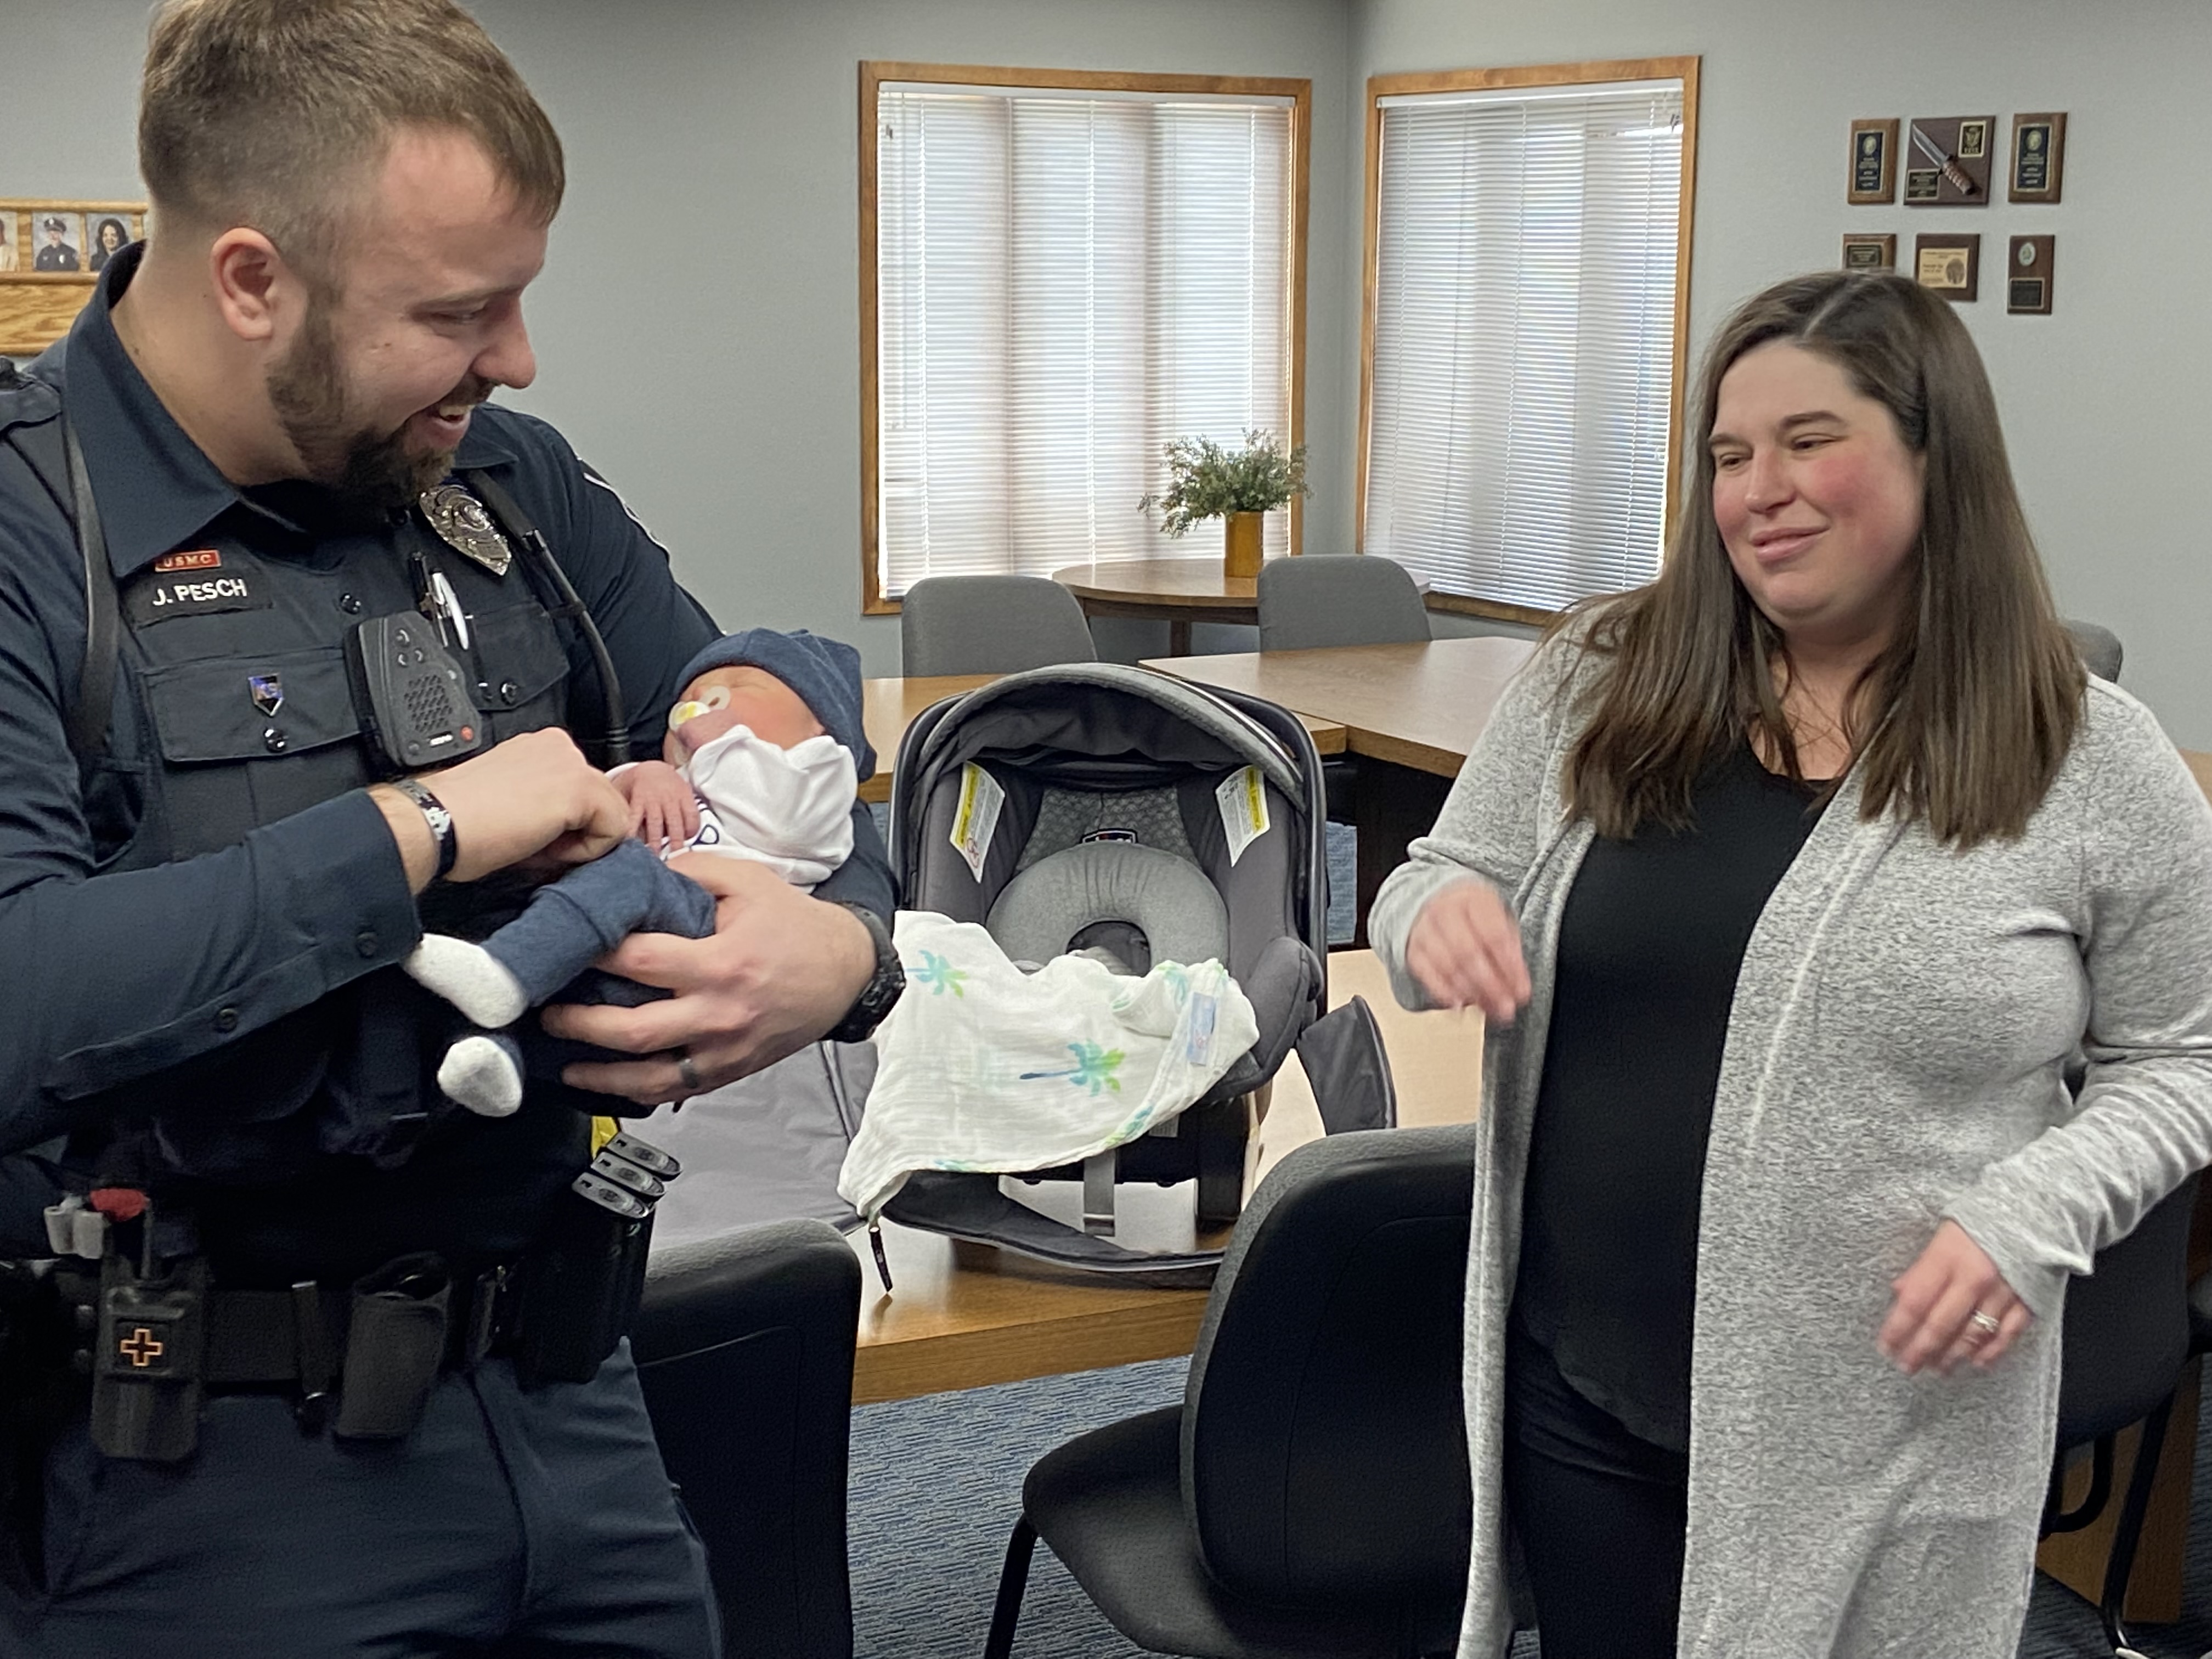 Germantown police officer praised for helping deliver baby boy